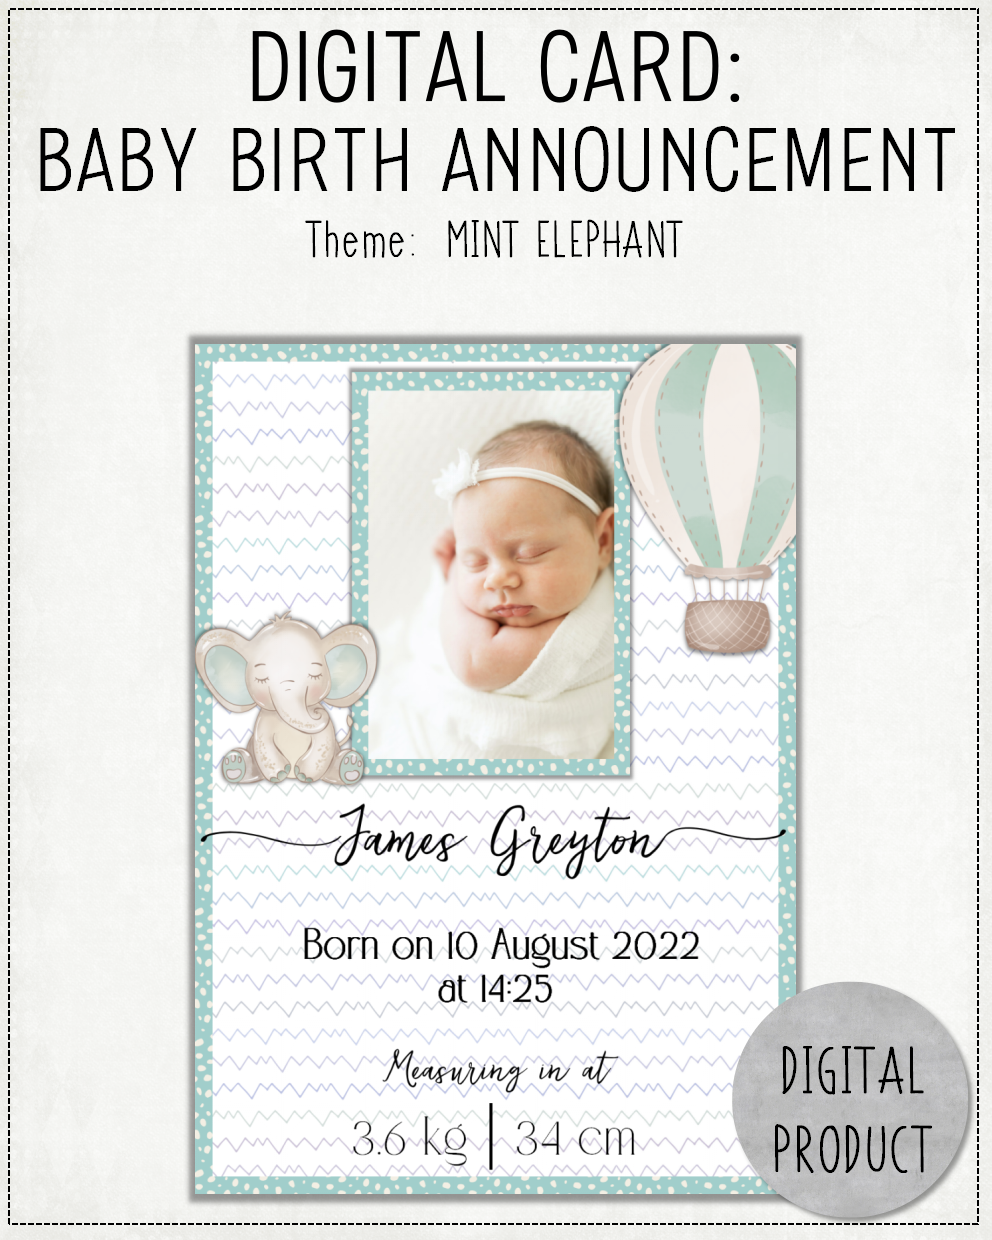 DIGITAL CARD: Baby Birth Announcement - Mint Elephant (English or Afrikaans)